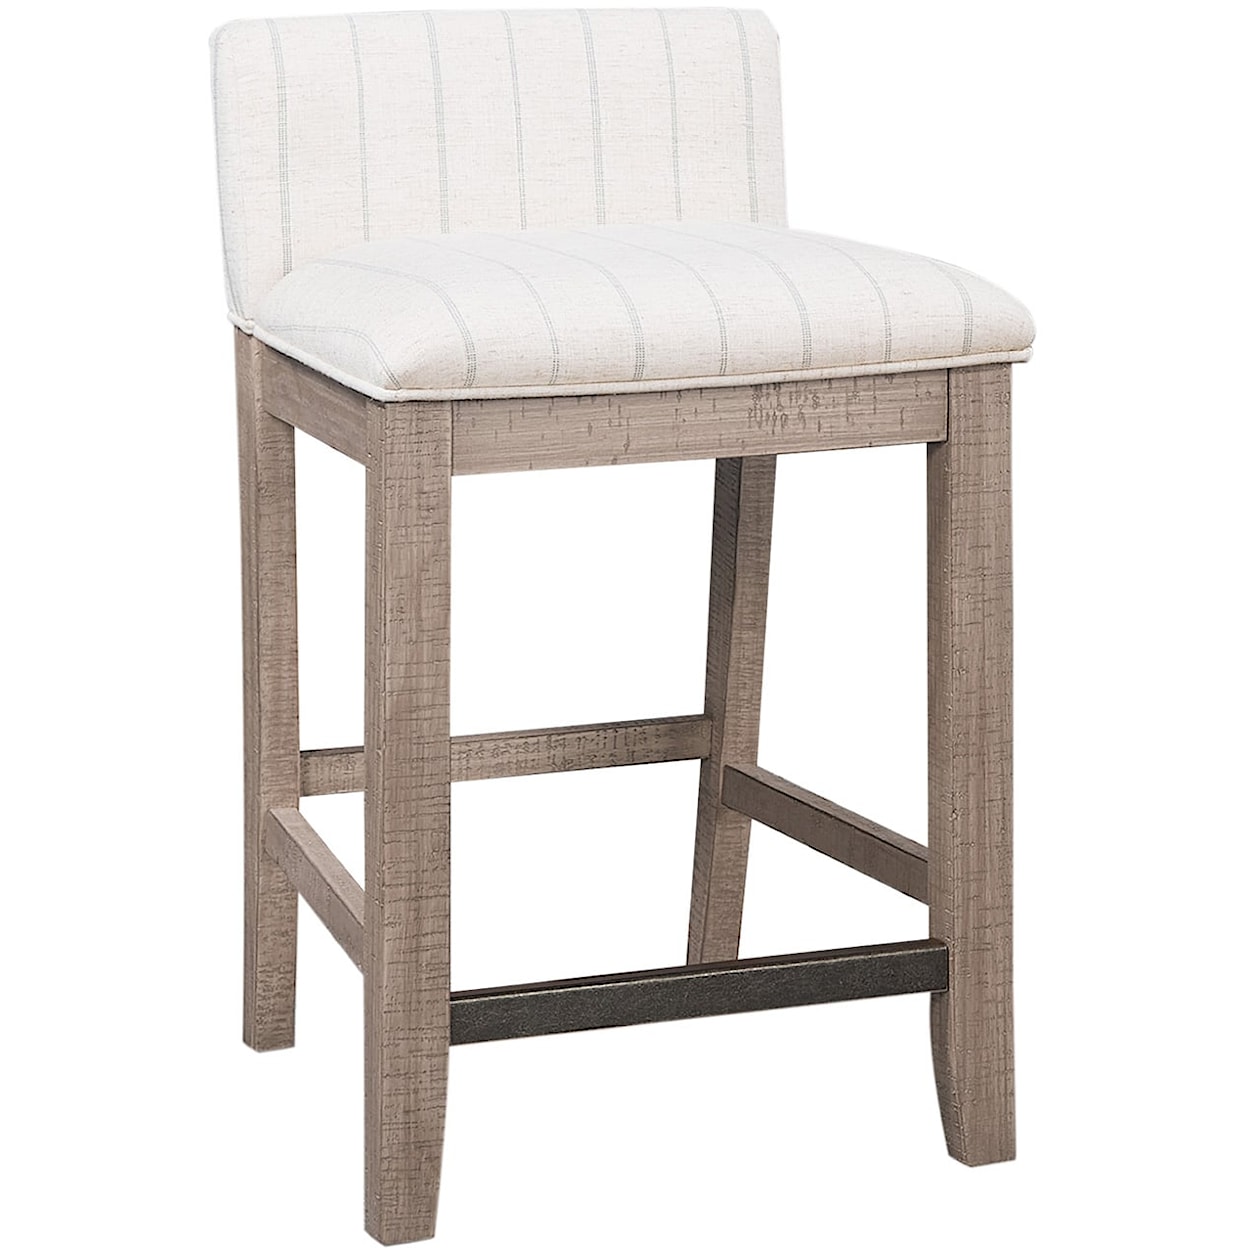 Aspenhome Foundry Counter-Height Stool with Upholstered Seat